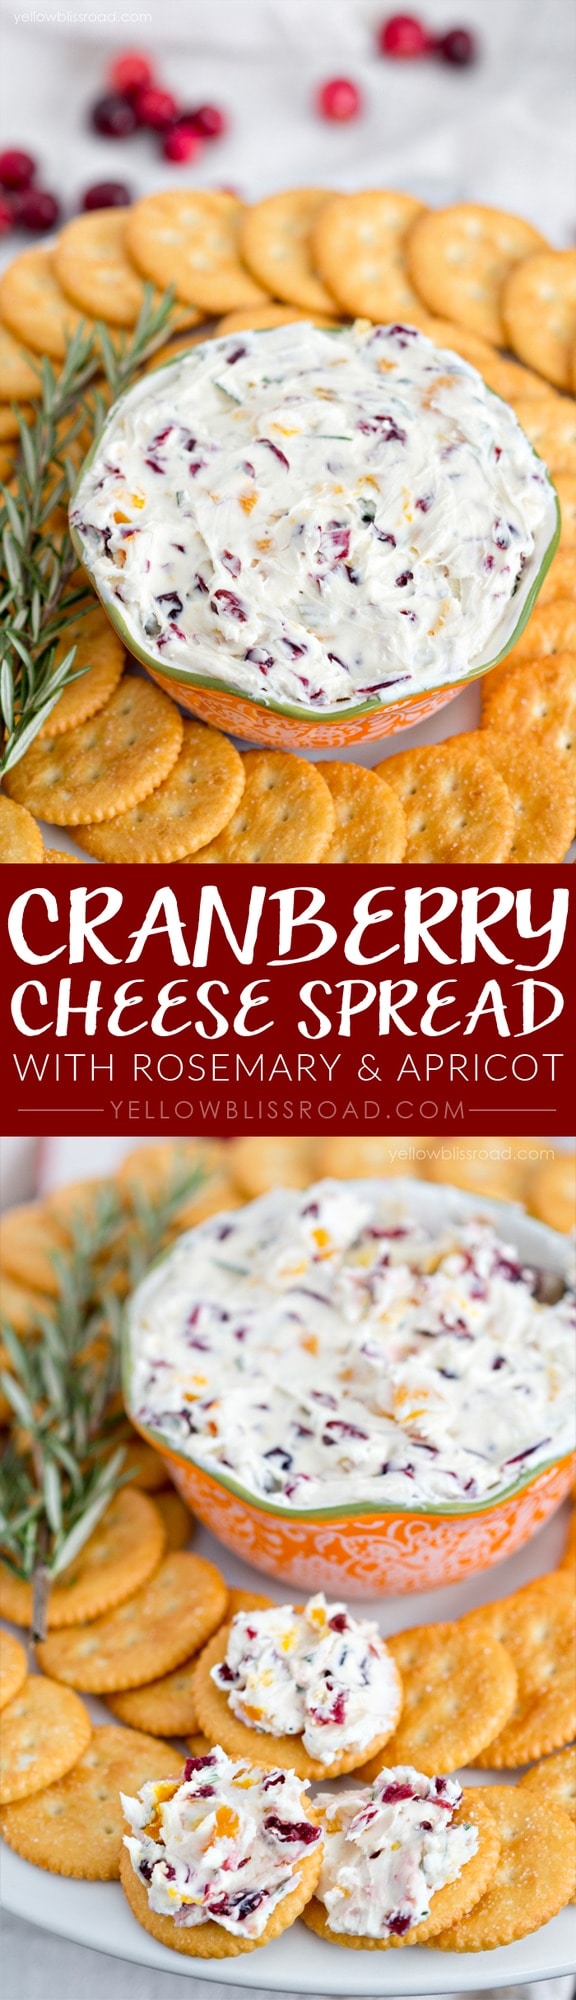 Holiday Cheese Spread recipe with dried cranberries & apricots, rosemary, and goat and cream cheeses - spread it on crackers or toasted bread